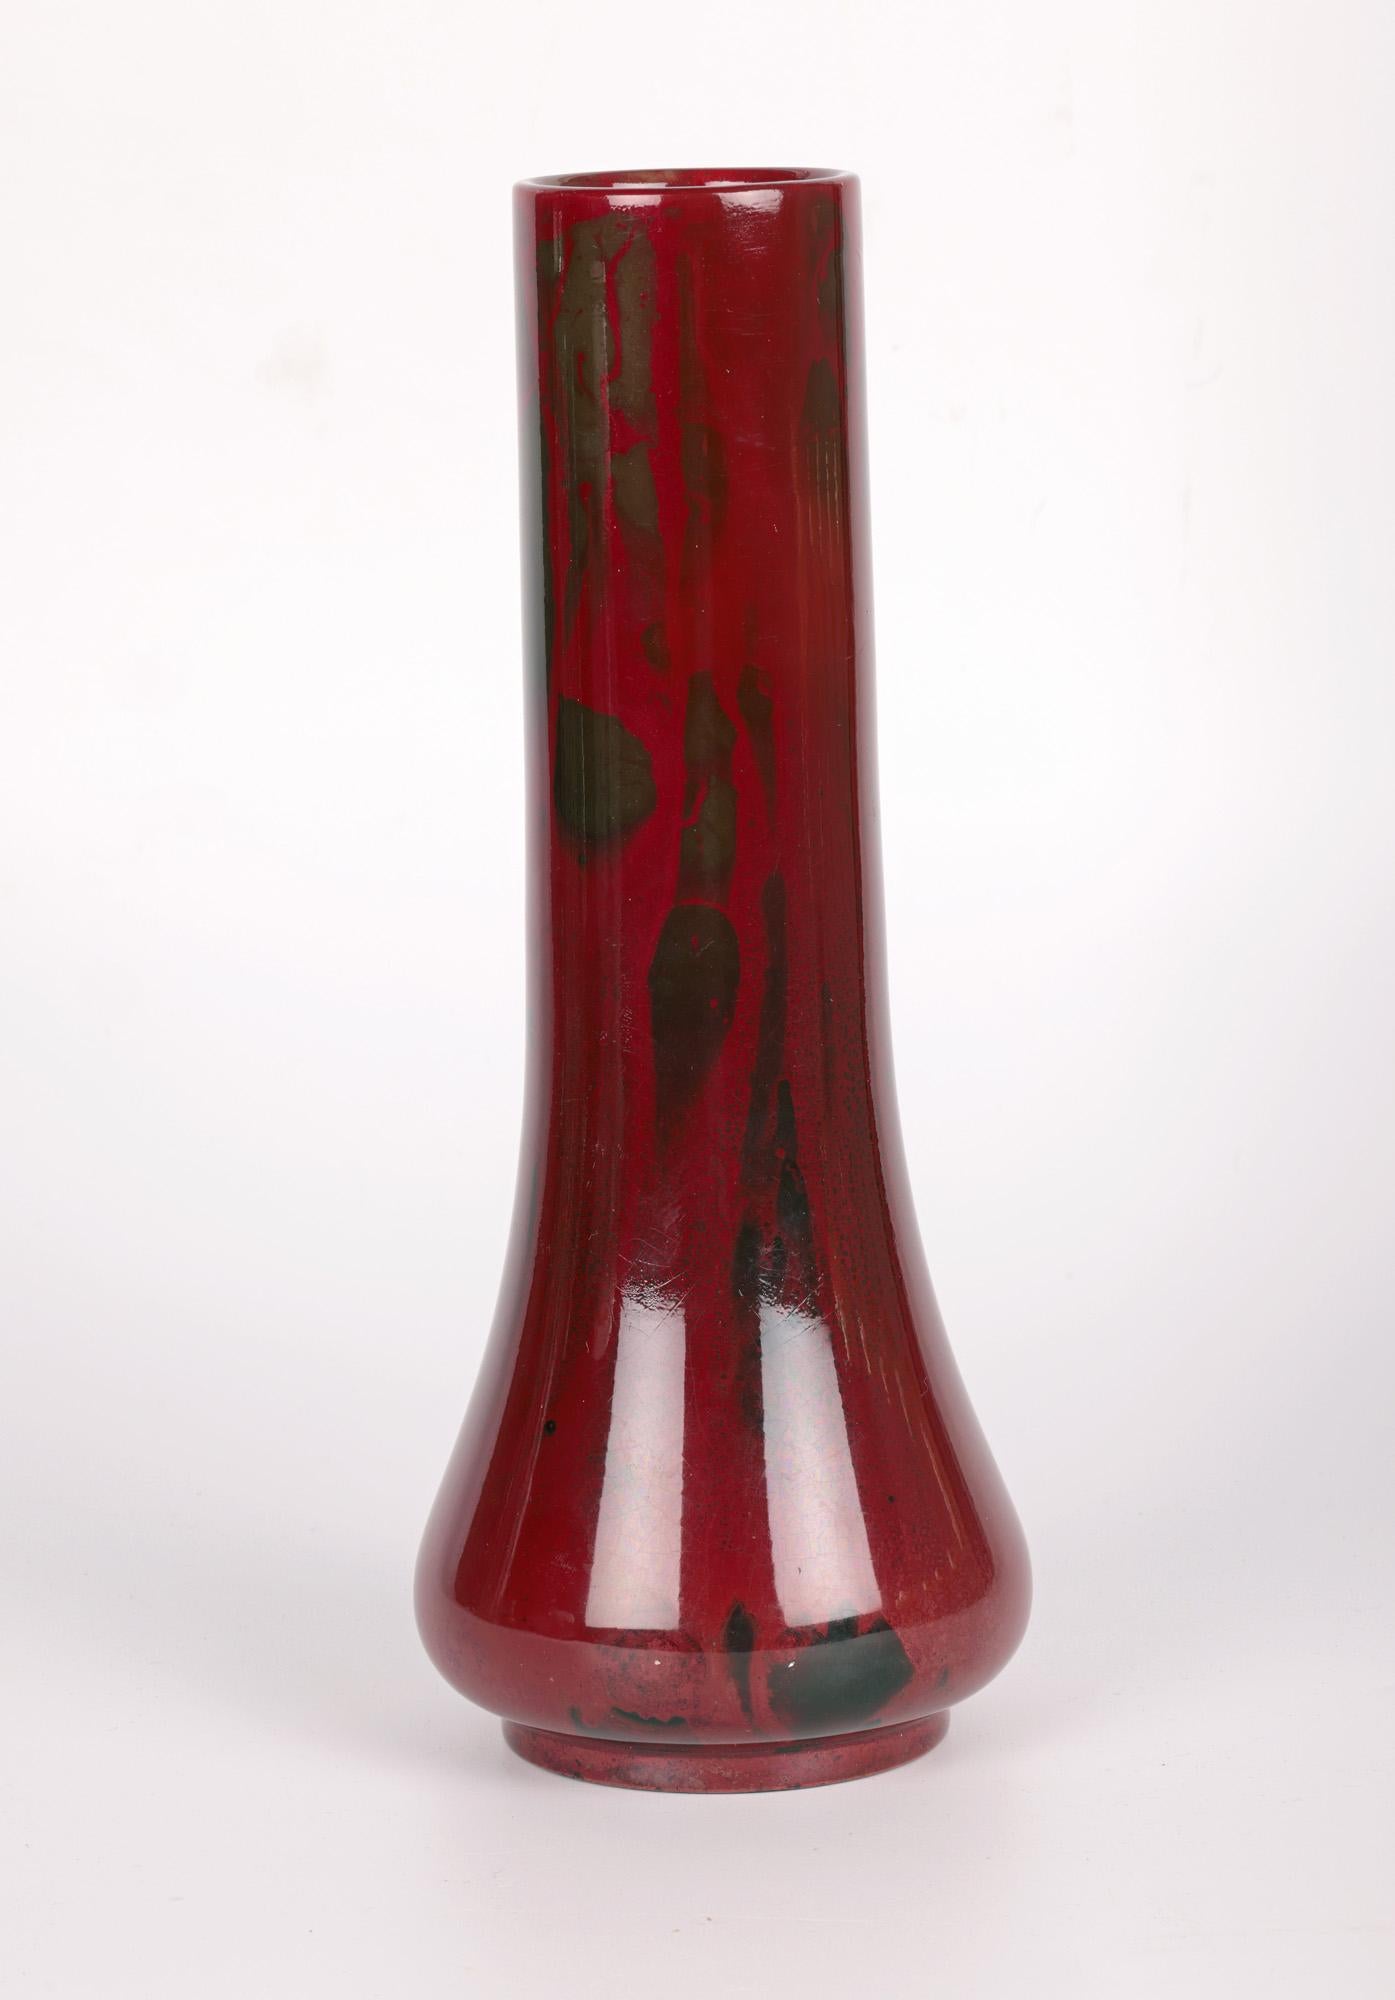 Howsons Art Nouveau Pottery Flambe Vase by Edward Wilks Dated 1912 For Sale 9